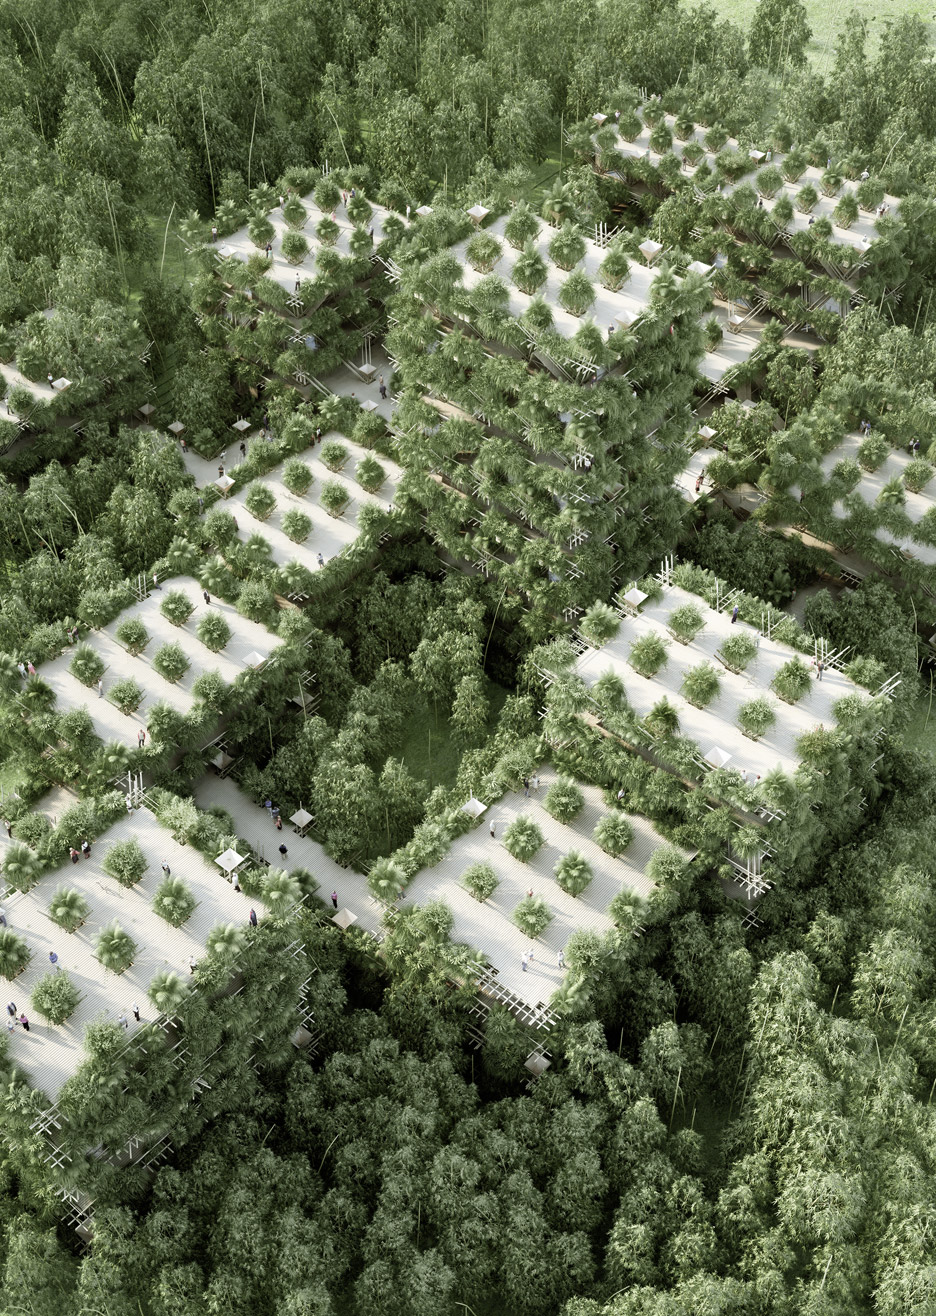 Penda Unveils Vision For Bamboo City Made From Interlocking Modular Components